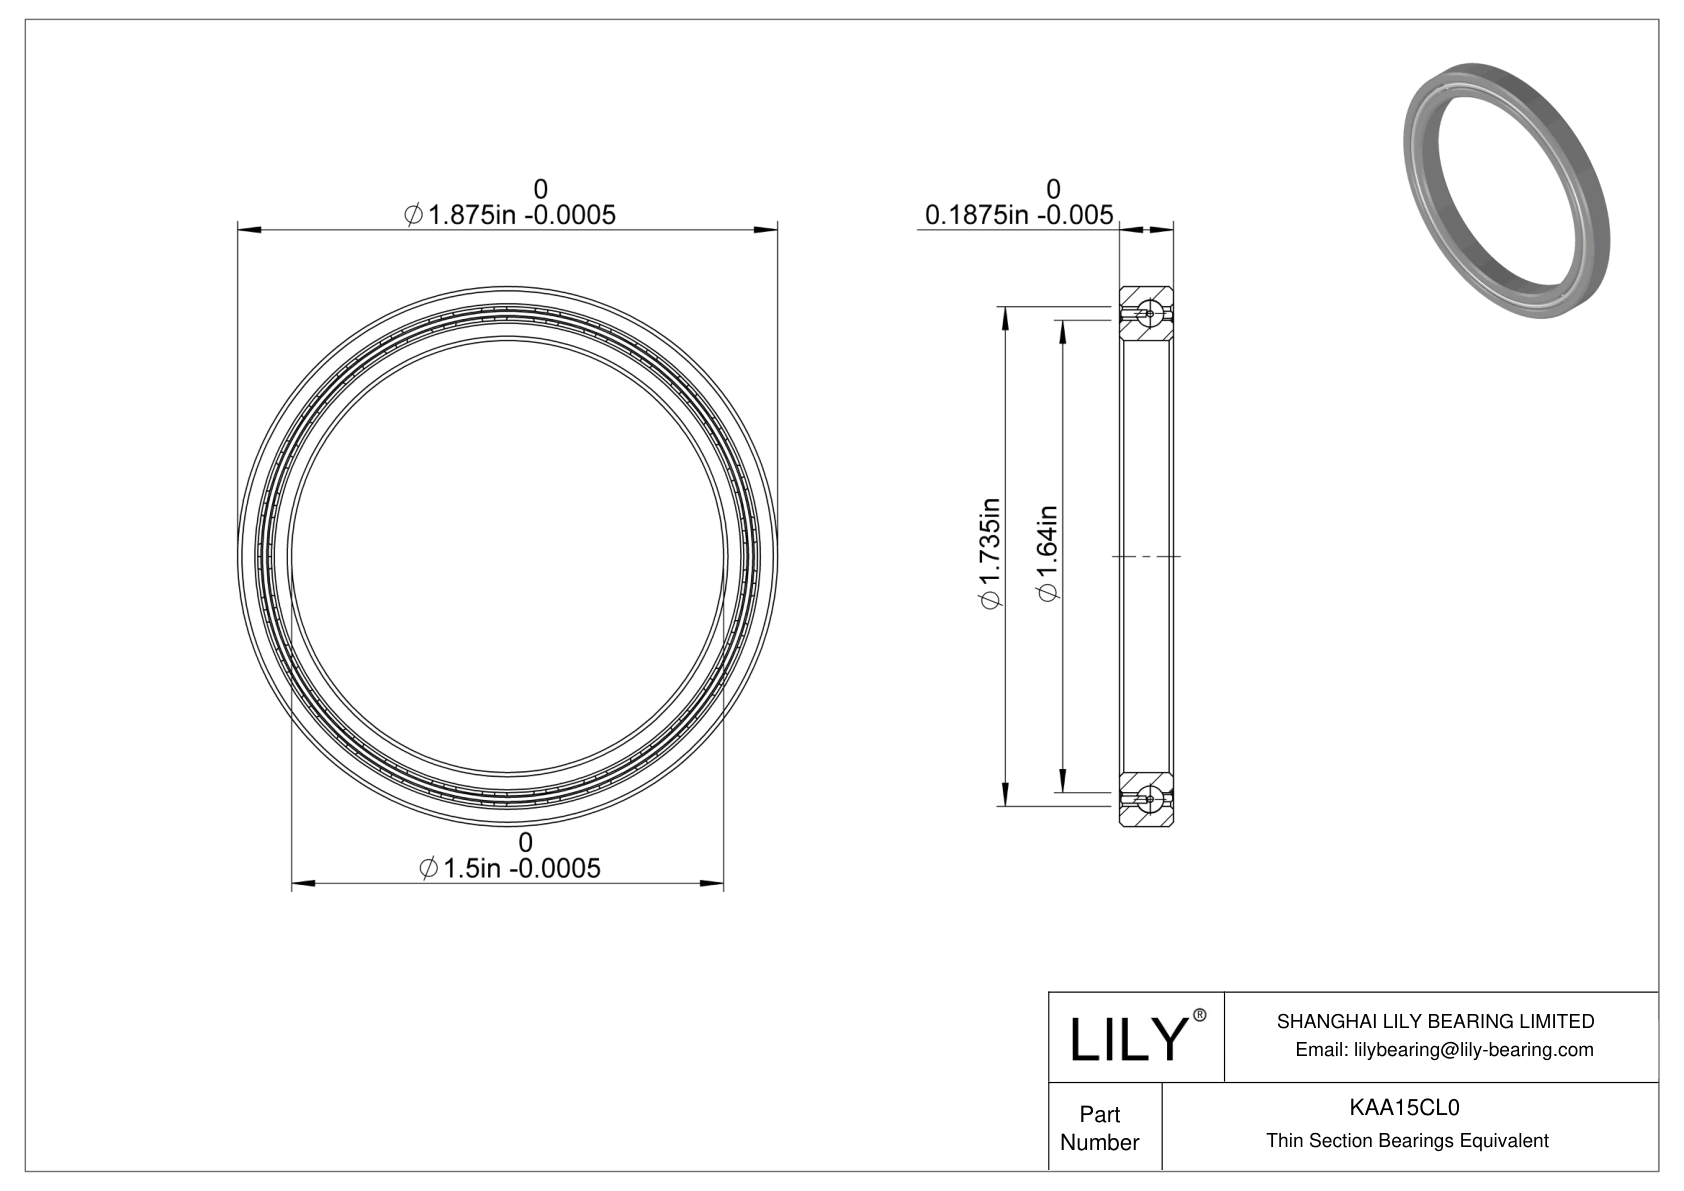 KAA15CL0 Constant Section (CS) Bearings cad drawing